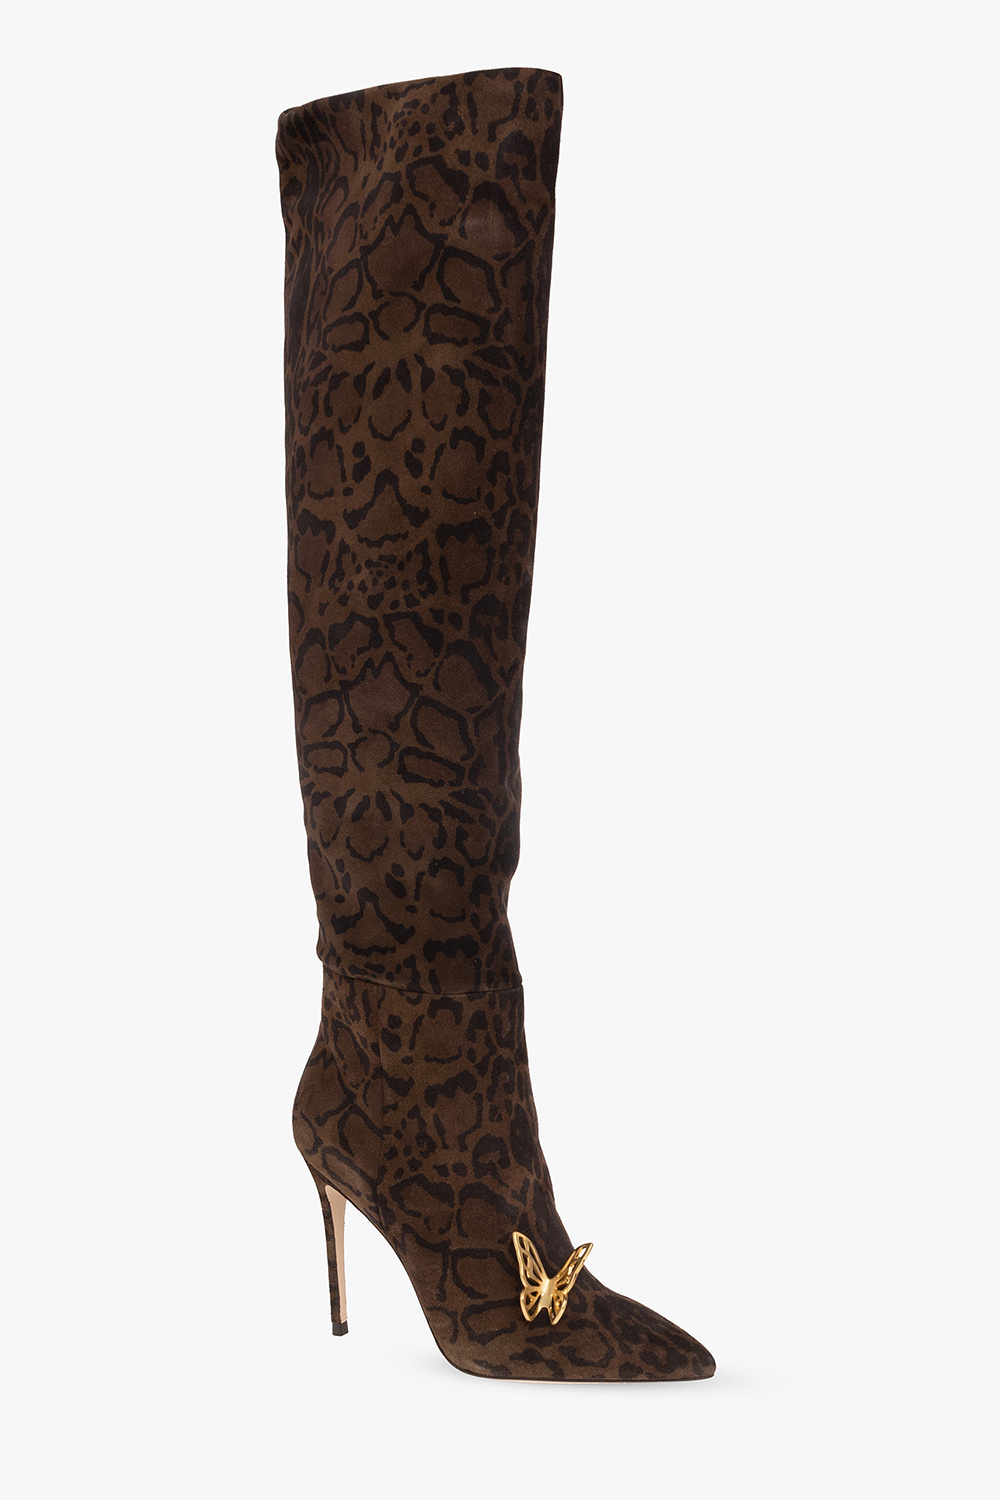 Sophia Webster ‘Mariposa’ heeled over-the-knee boots